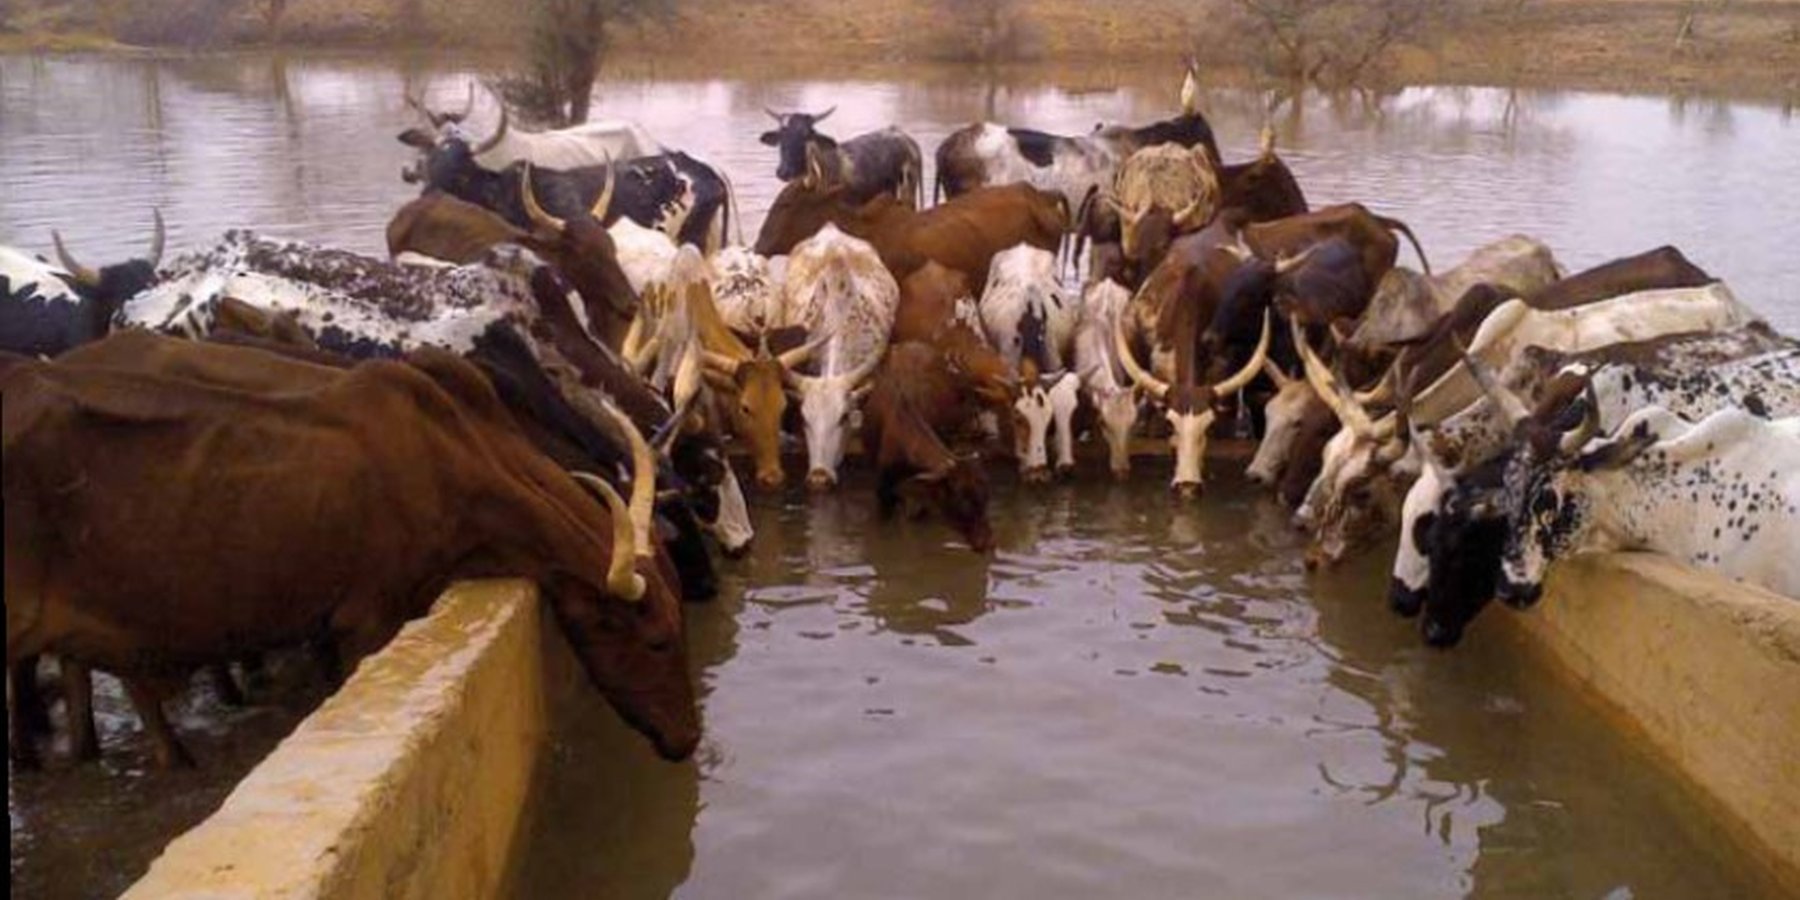 Cattle drinking in one of the ponds of 'Forage Christine'.